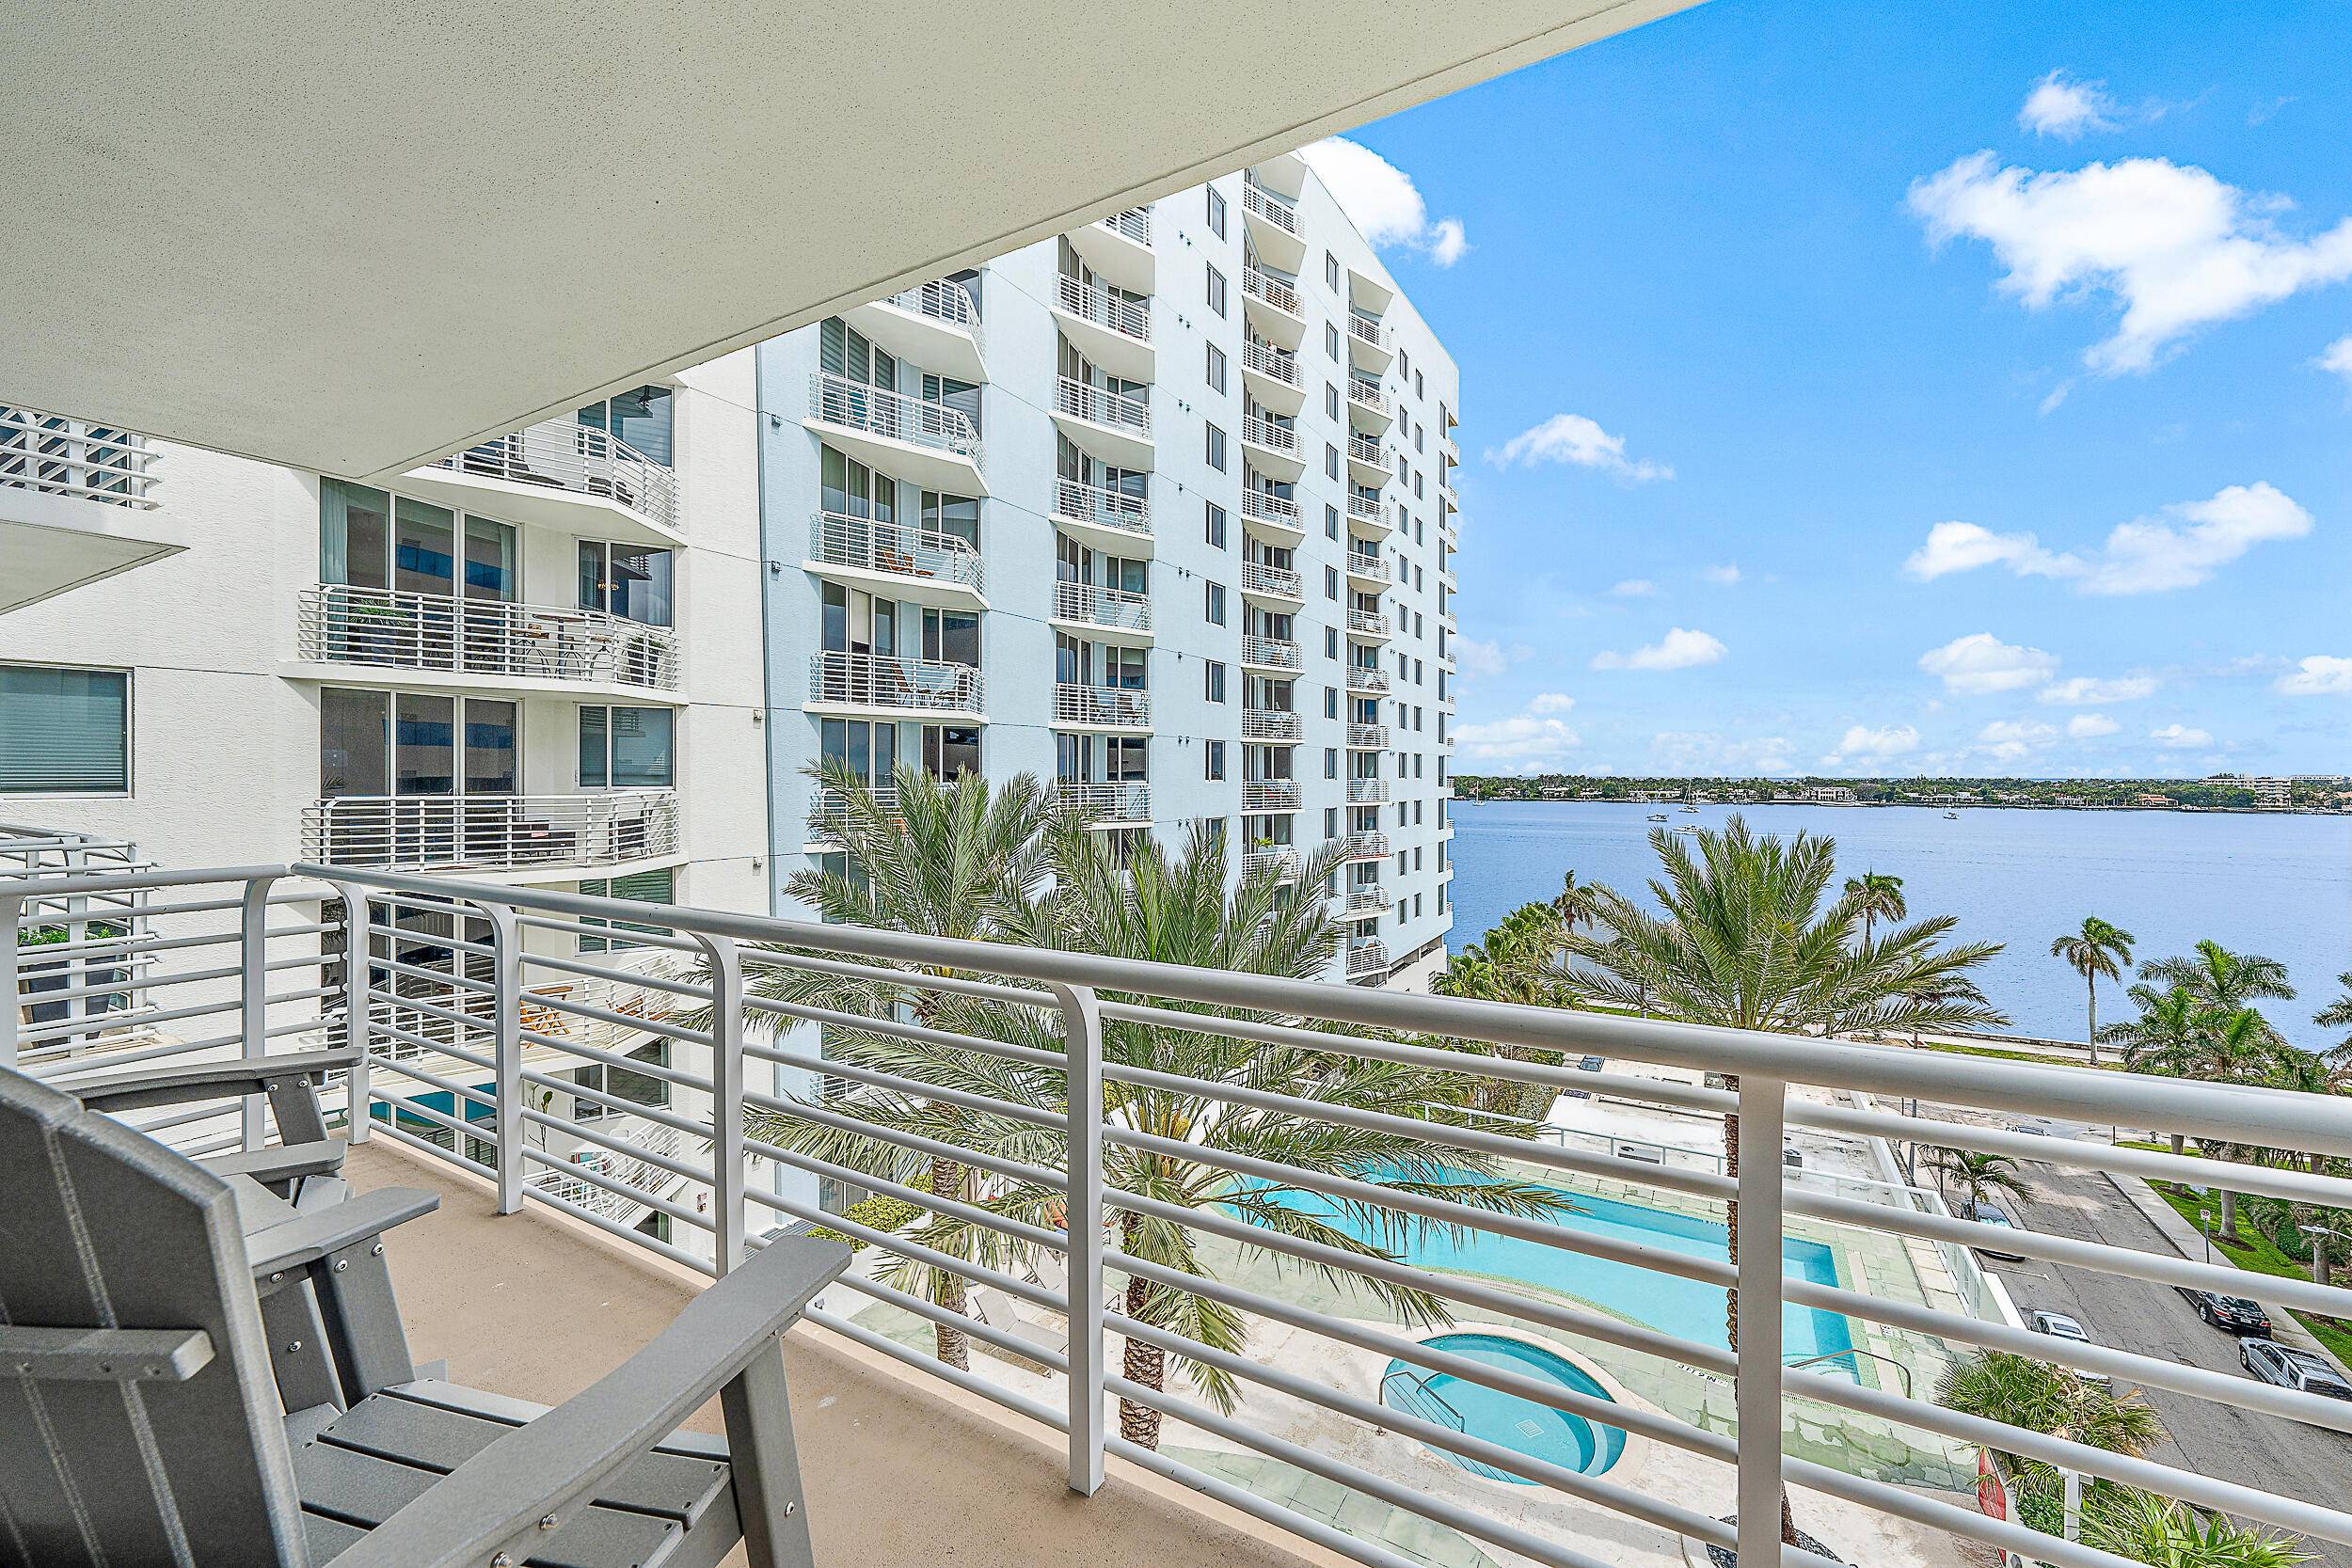 Views of Palm Beach island, the intracoastal, and the infinity pool welcome you home.